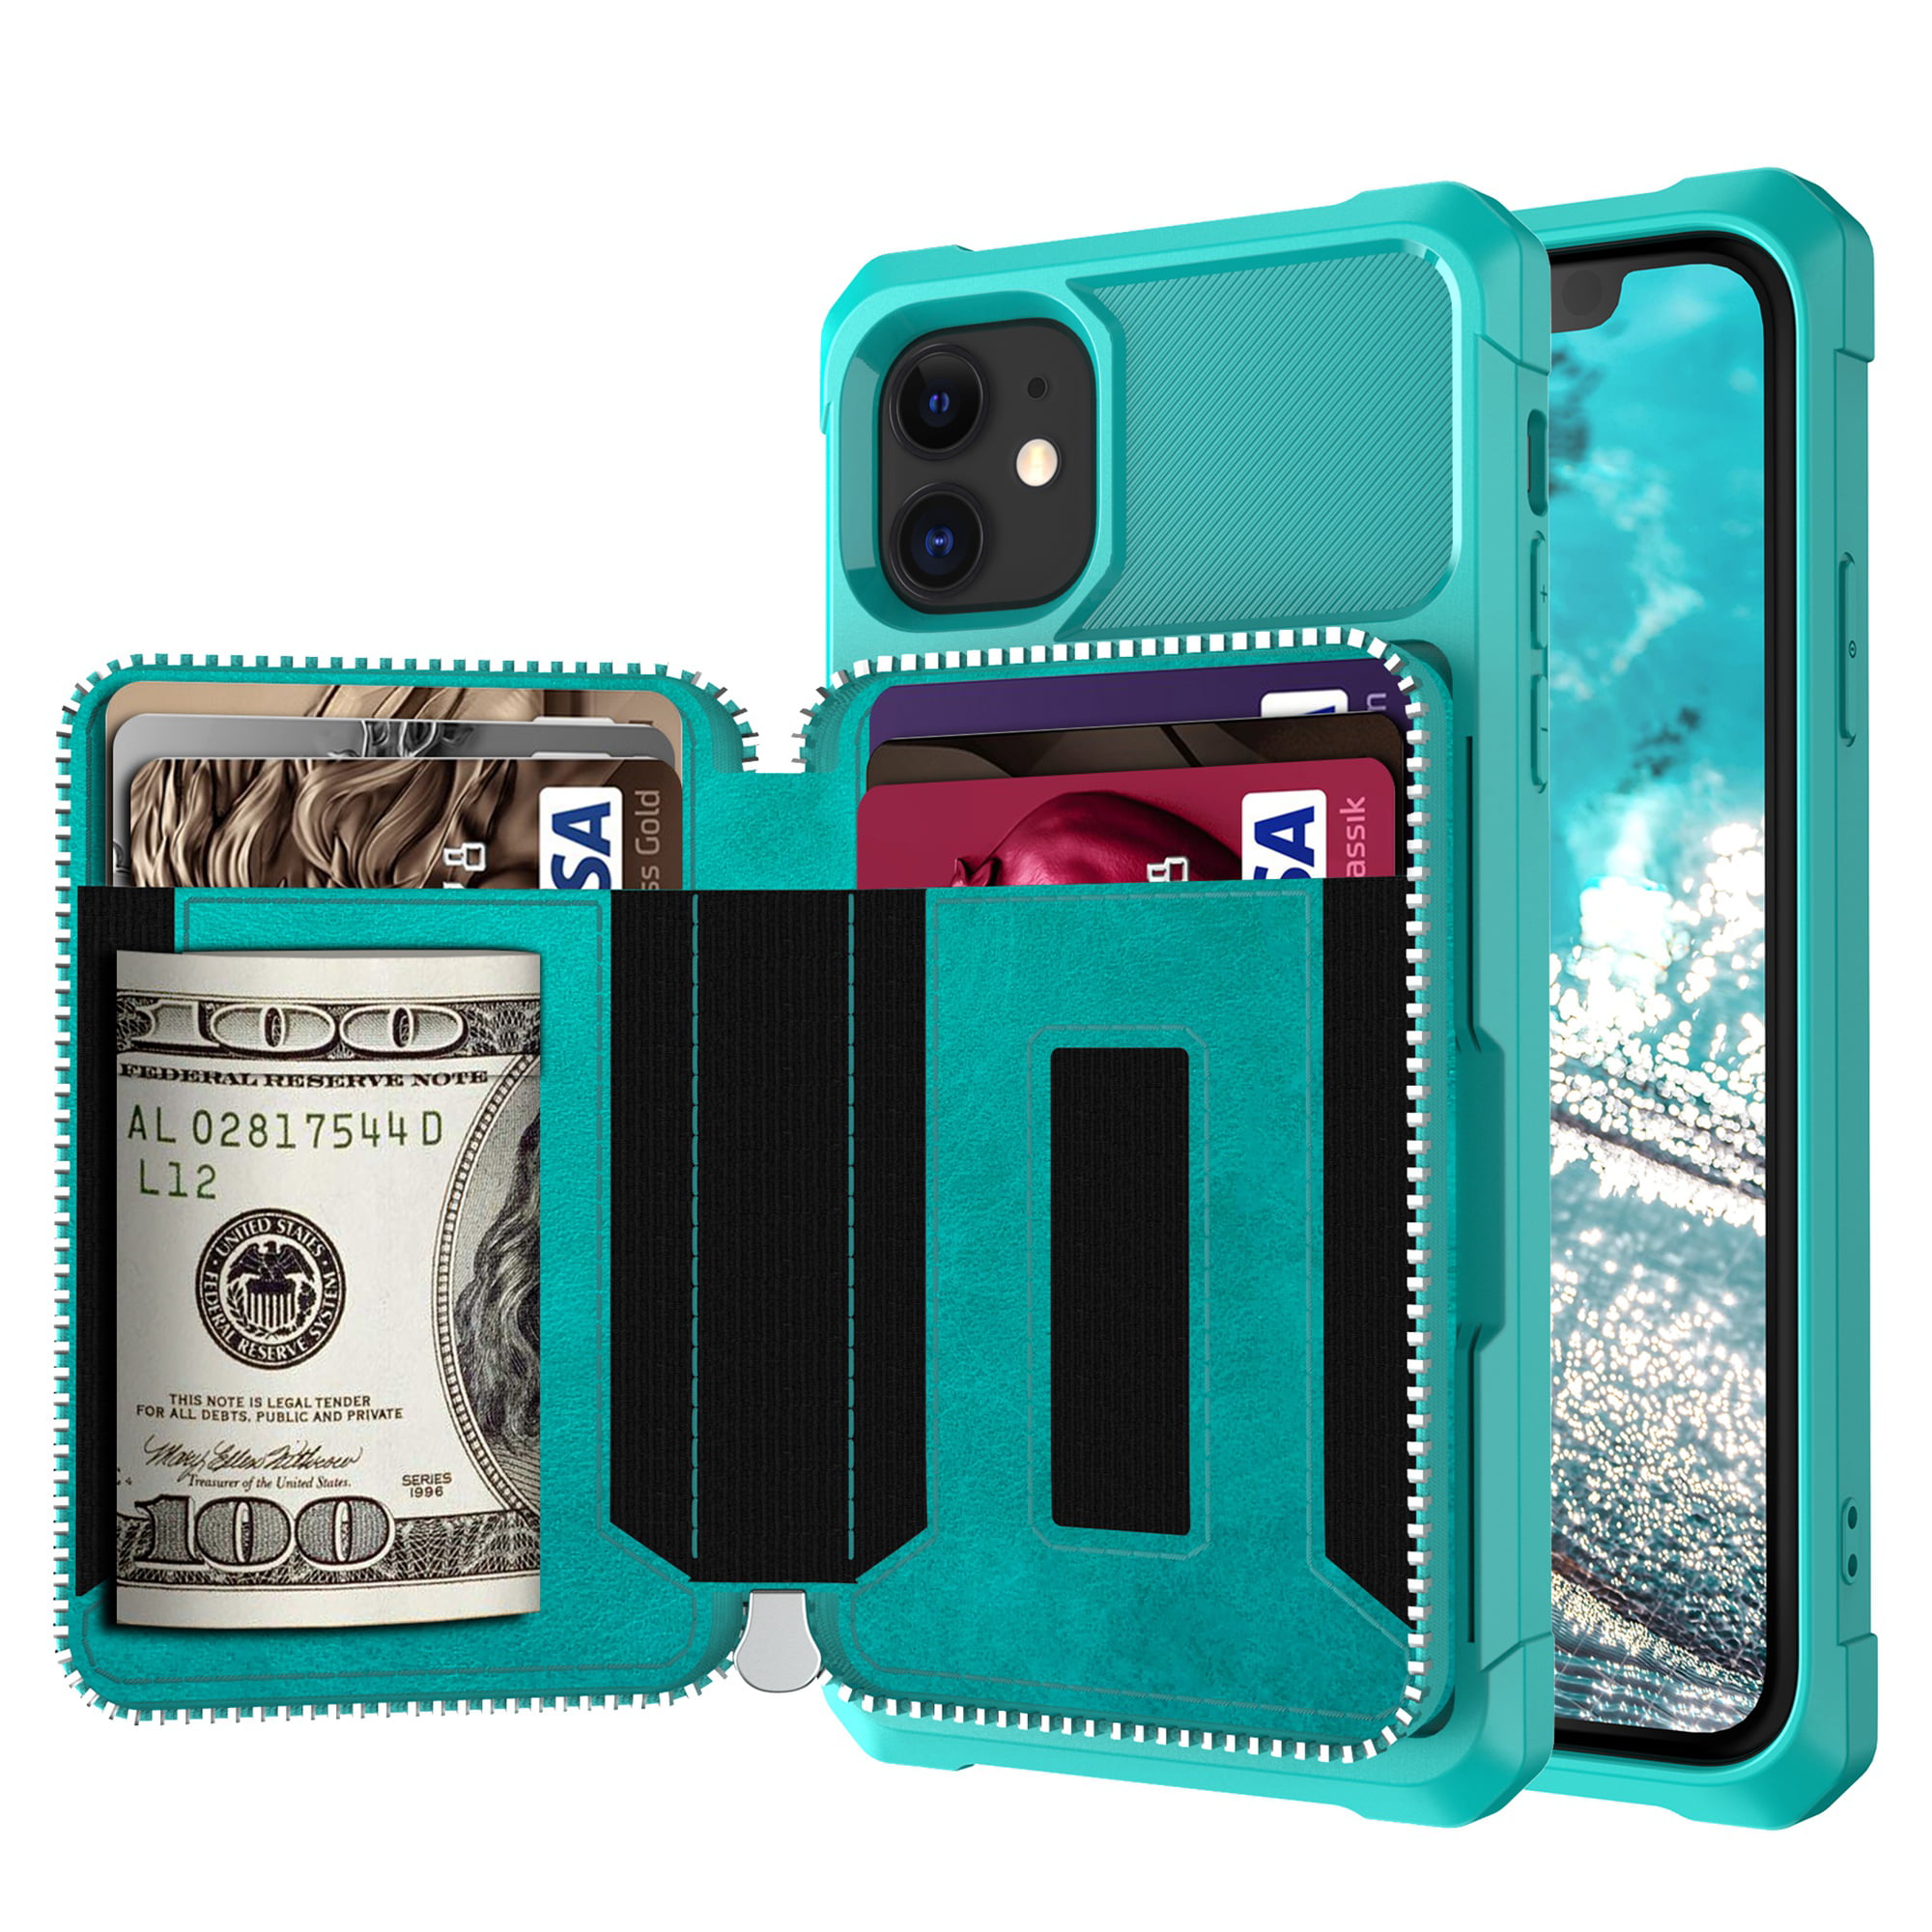 Dteck Wallet Case For iPhone 11, Zipper Wallet Case with Credit Card